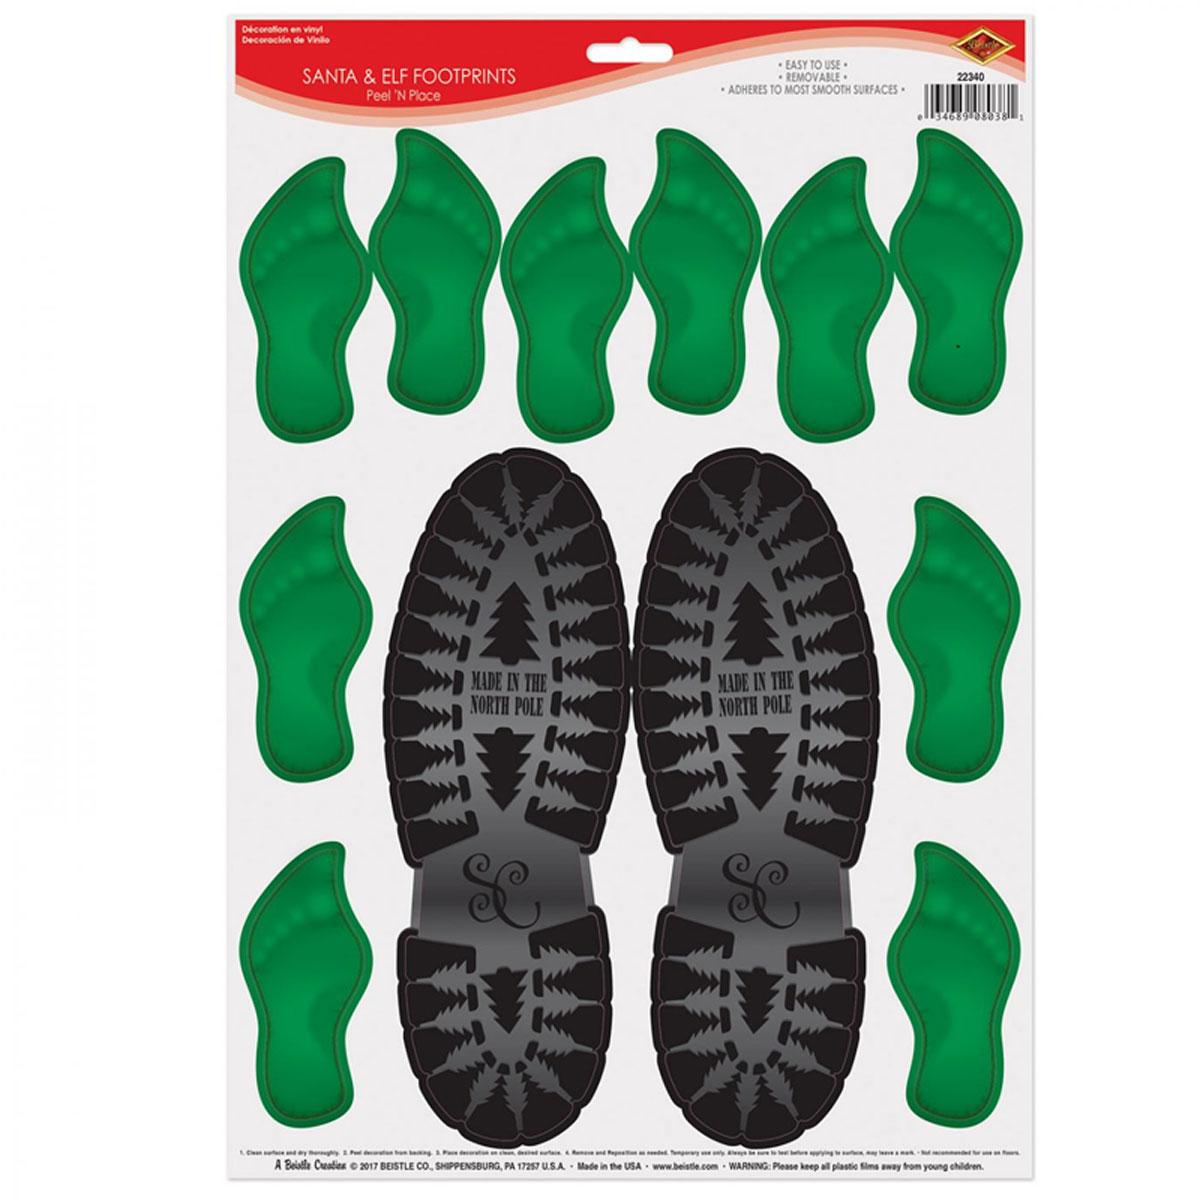 Santa and Elf Footprints Peel 'N Place by Beistle 22340 available in the UK here at Karnival Costumes online party shop